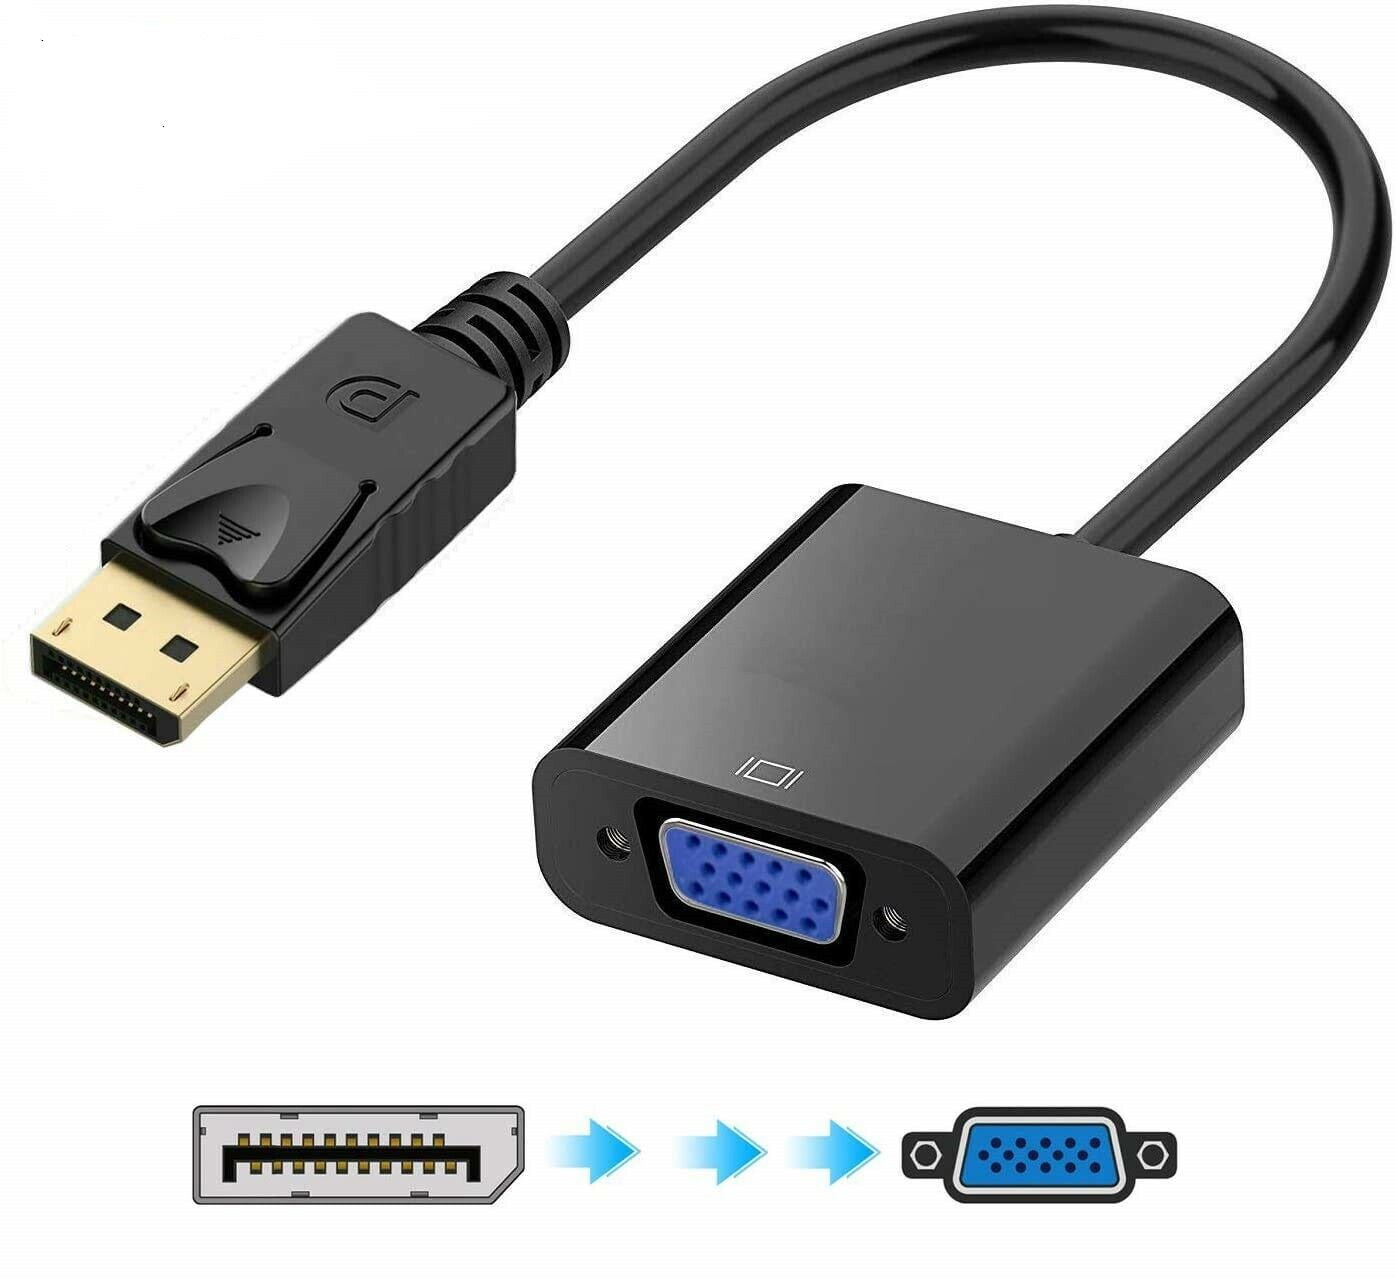 HDTV Monitor Laptop PC VGA to HDMI look see 1080P VGA Male to HDMI Female Adapter Converter with Audio Cable for Computer PS3/4 Projector Desktop 